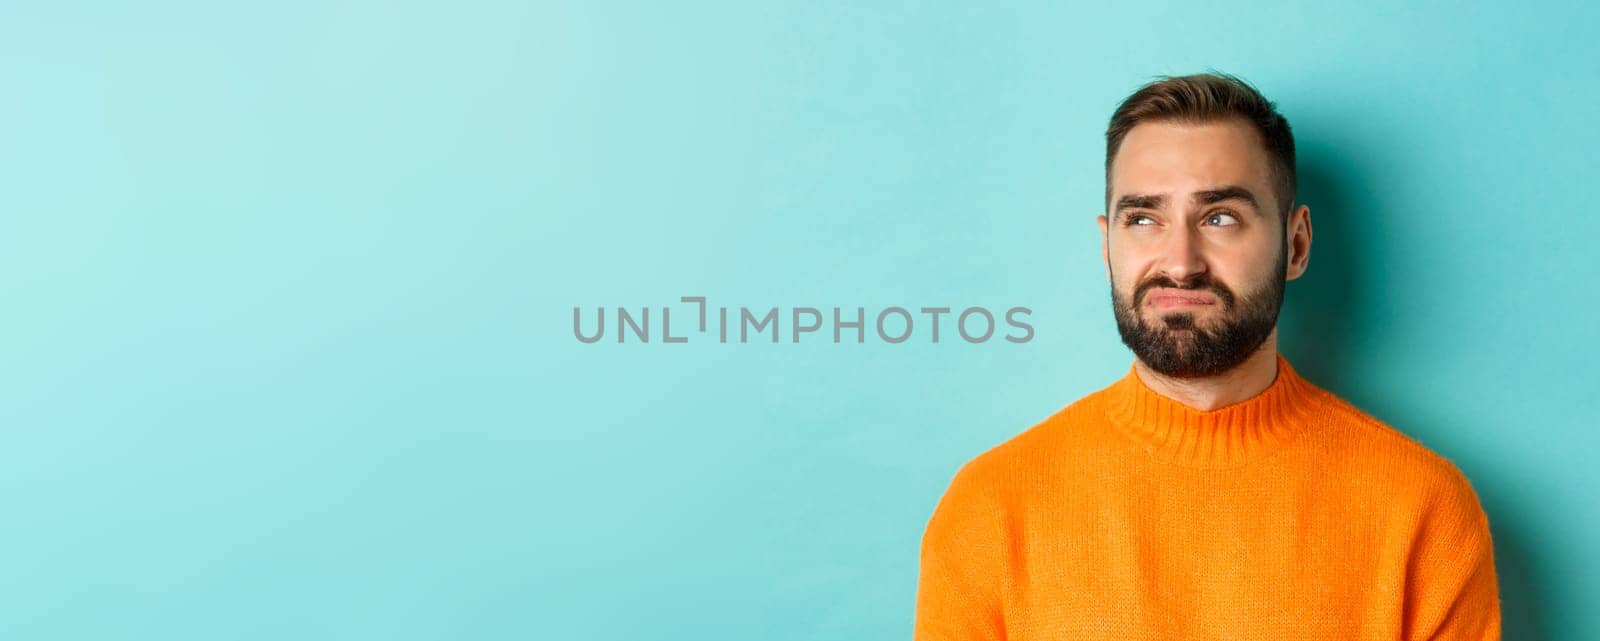 Close-up of handsome caucasian man looking left disappointed and skeptical, staring at logo, wearing orange sweater, standing against turquoise background.